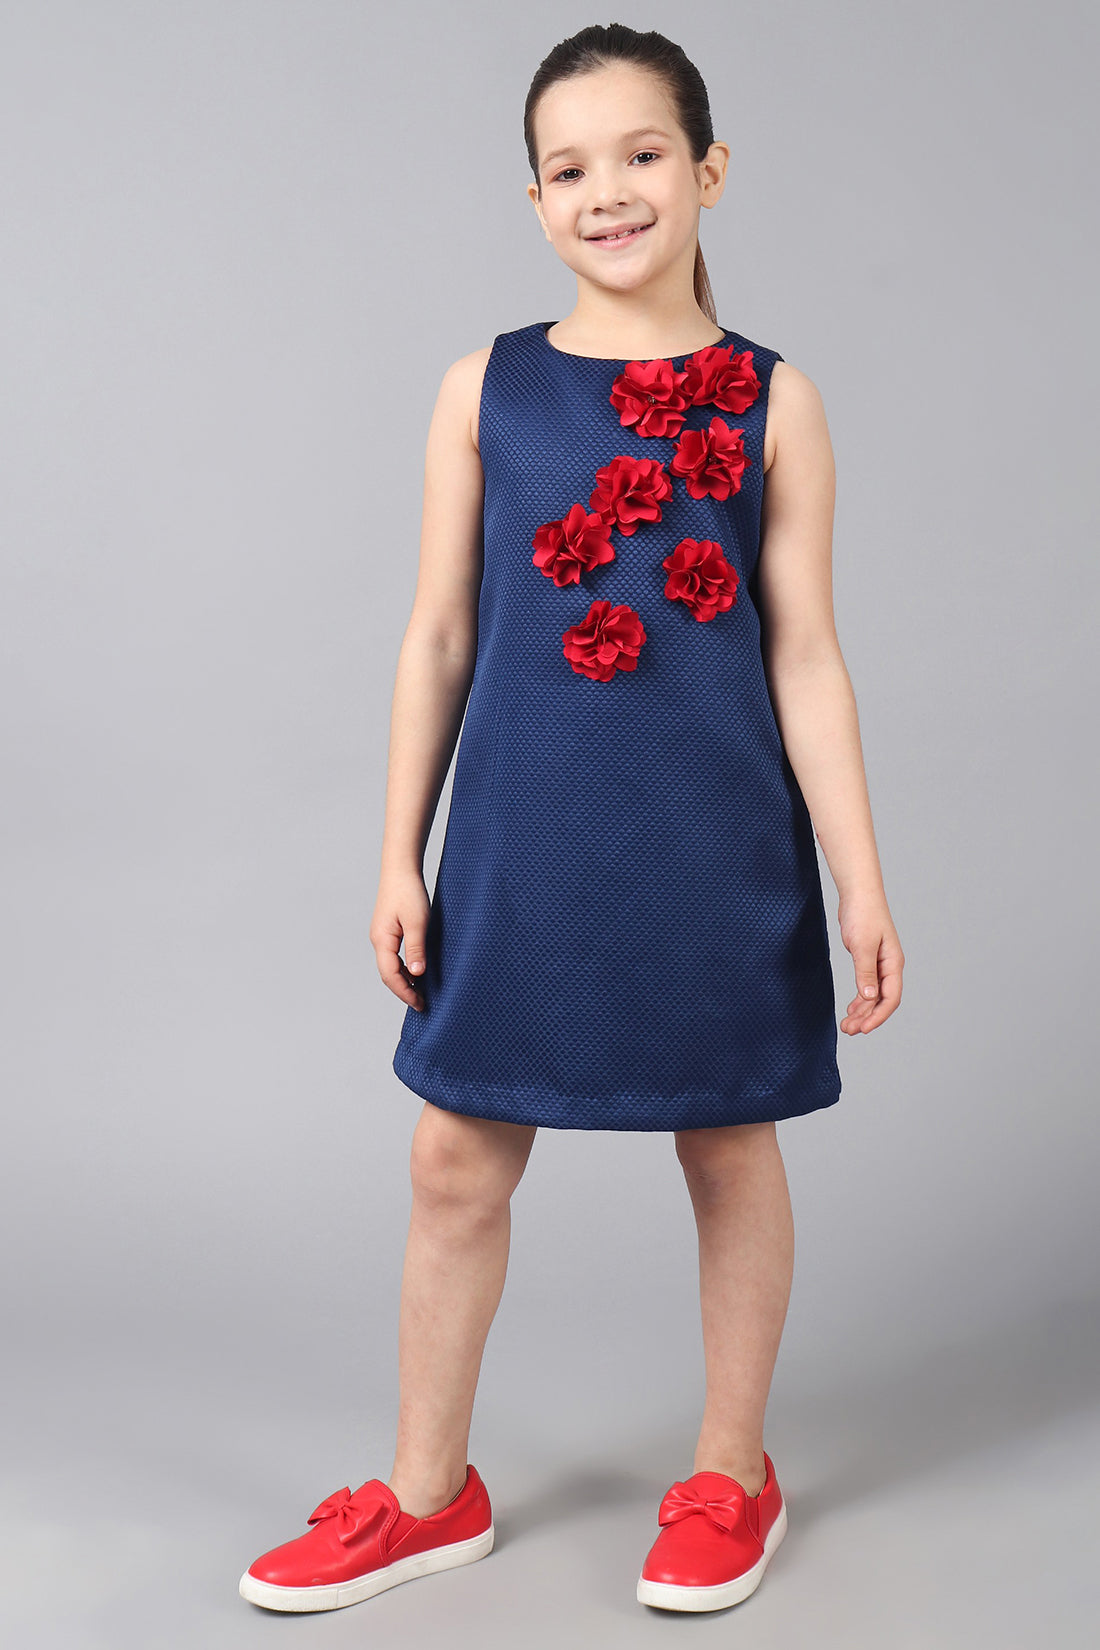 One Friday Kids Girls Navy Blue Sleeveless Dress With Flowers Applique